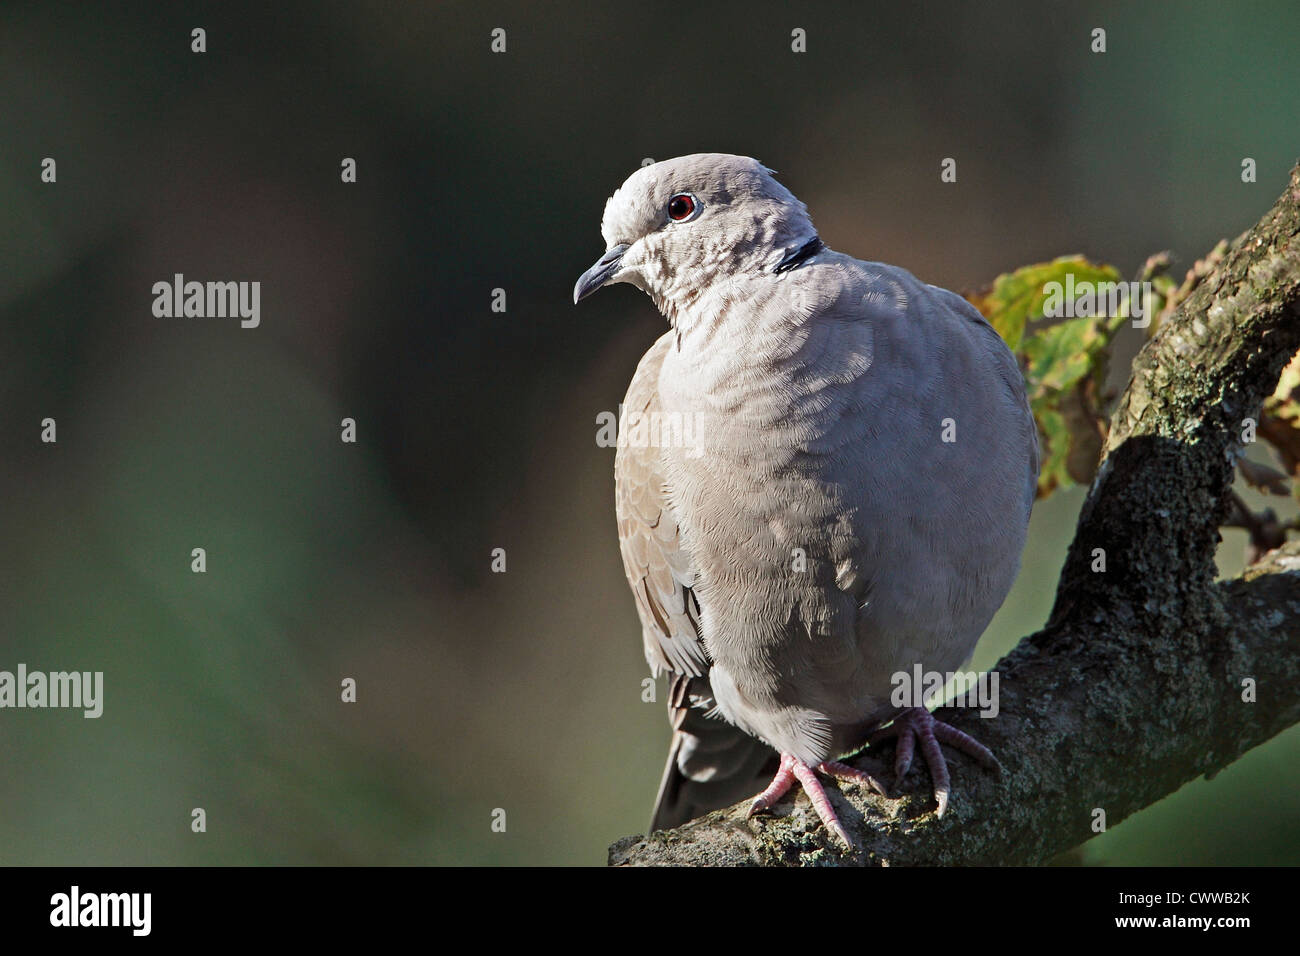 A Collared Dove (Streptopelia decaocto) perched on a tree branch. Stock Photo